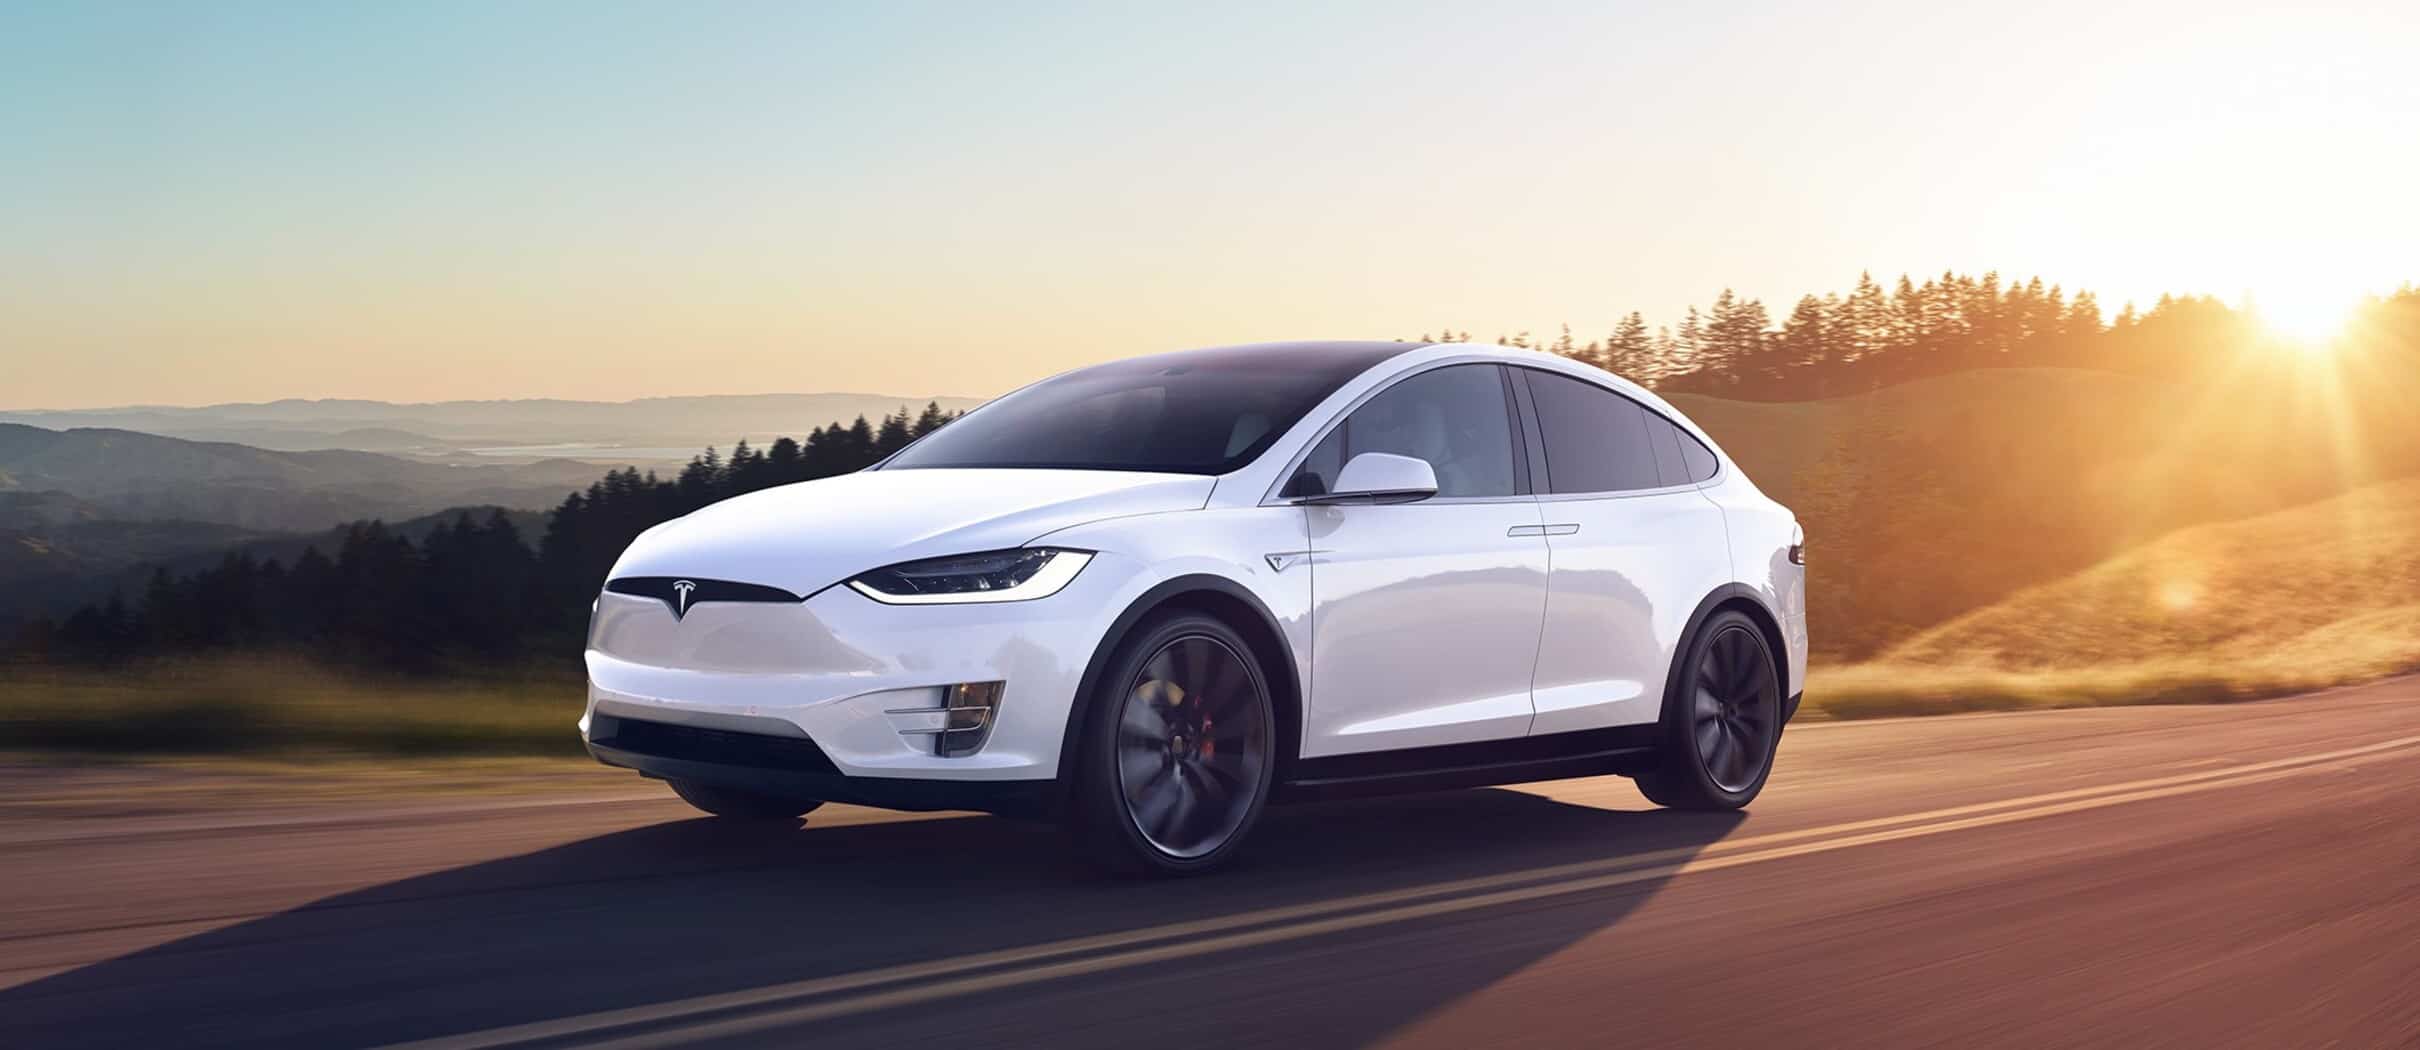 Tesla Model X: A white Tesla Model X parked in a picturesque natural setting, showcasing its groundbreaking design and spacious, family-oriented interior.